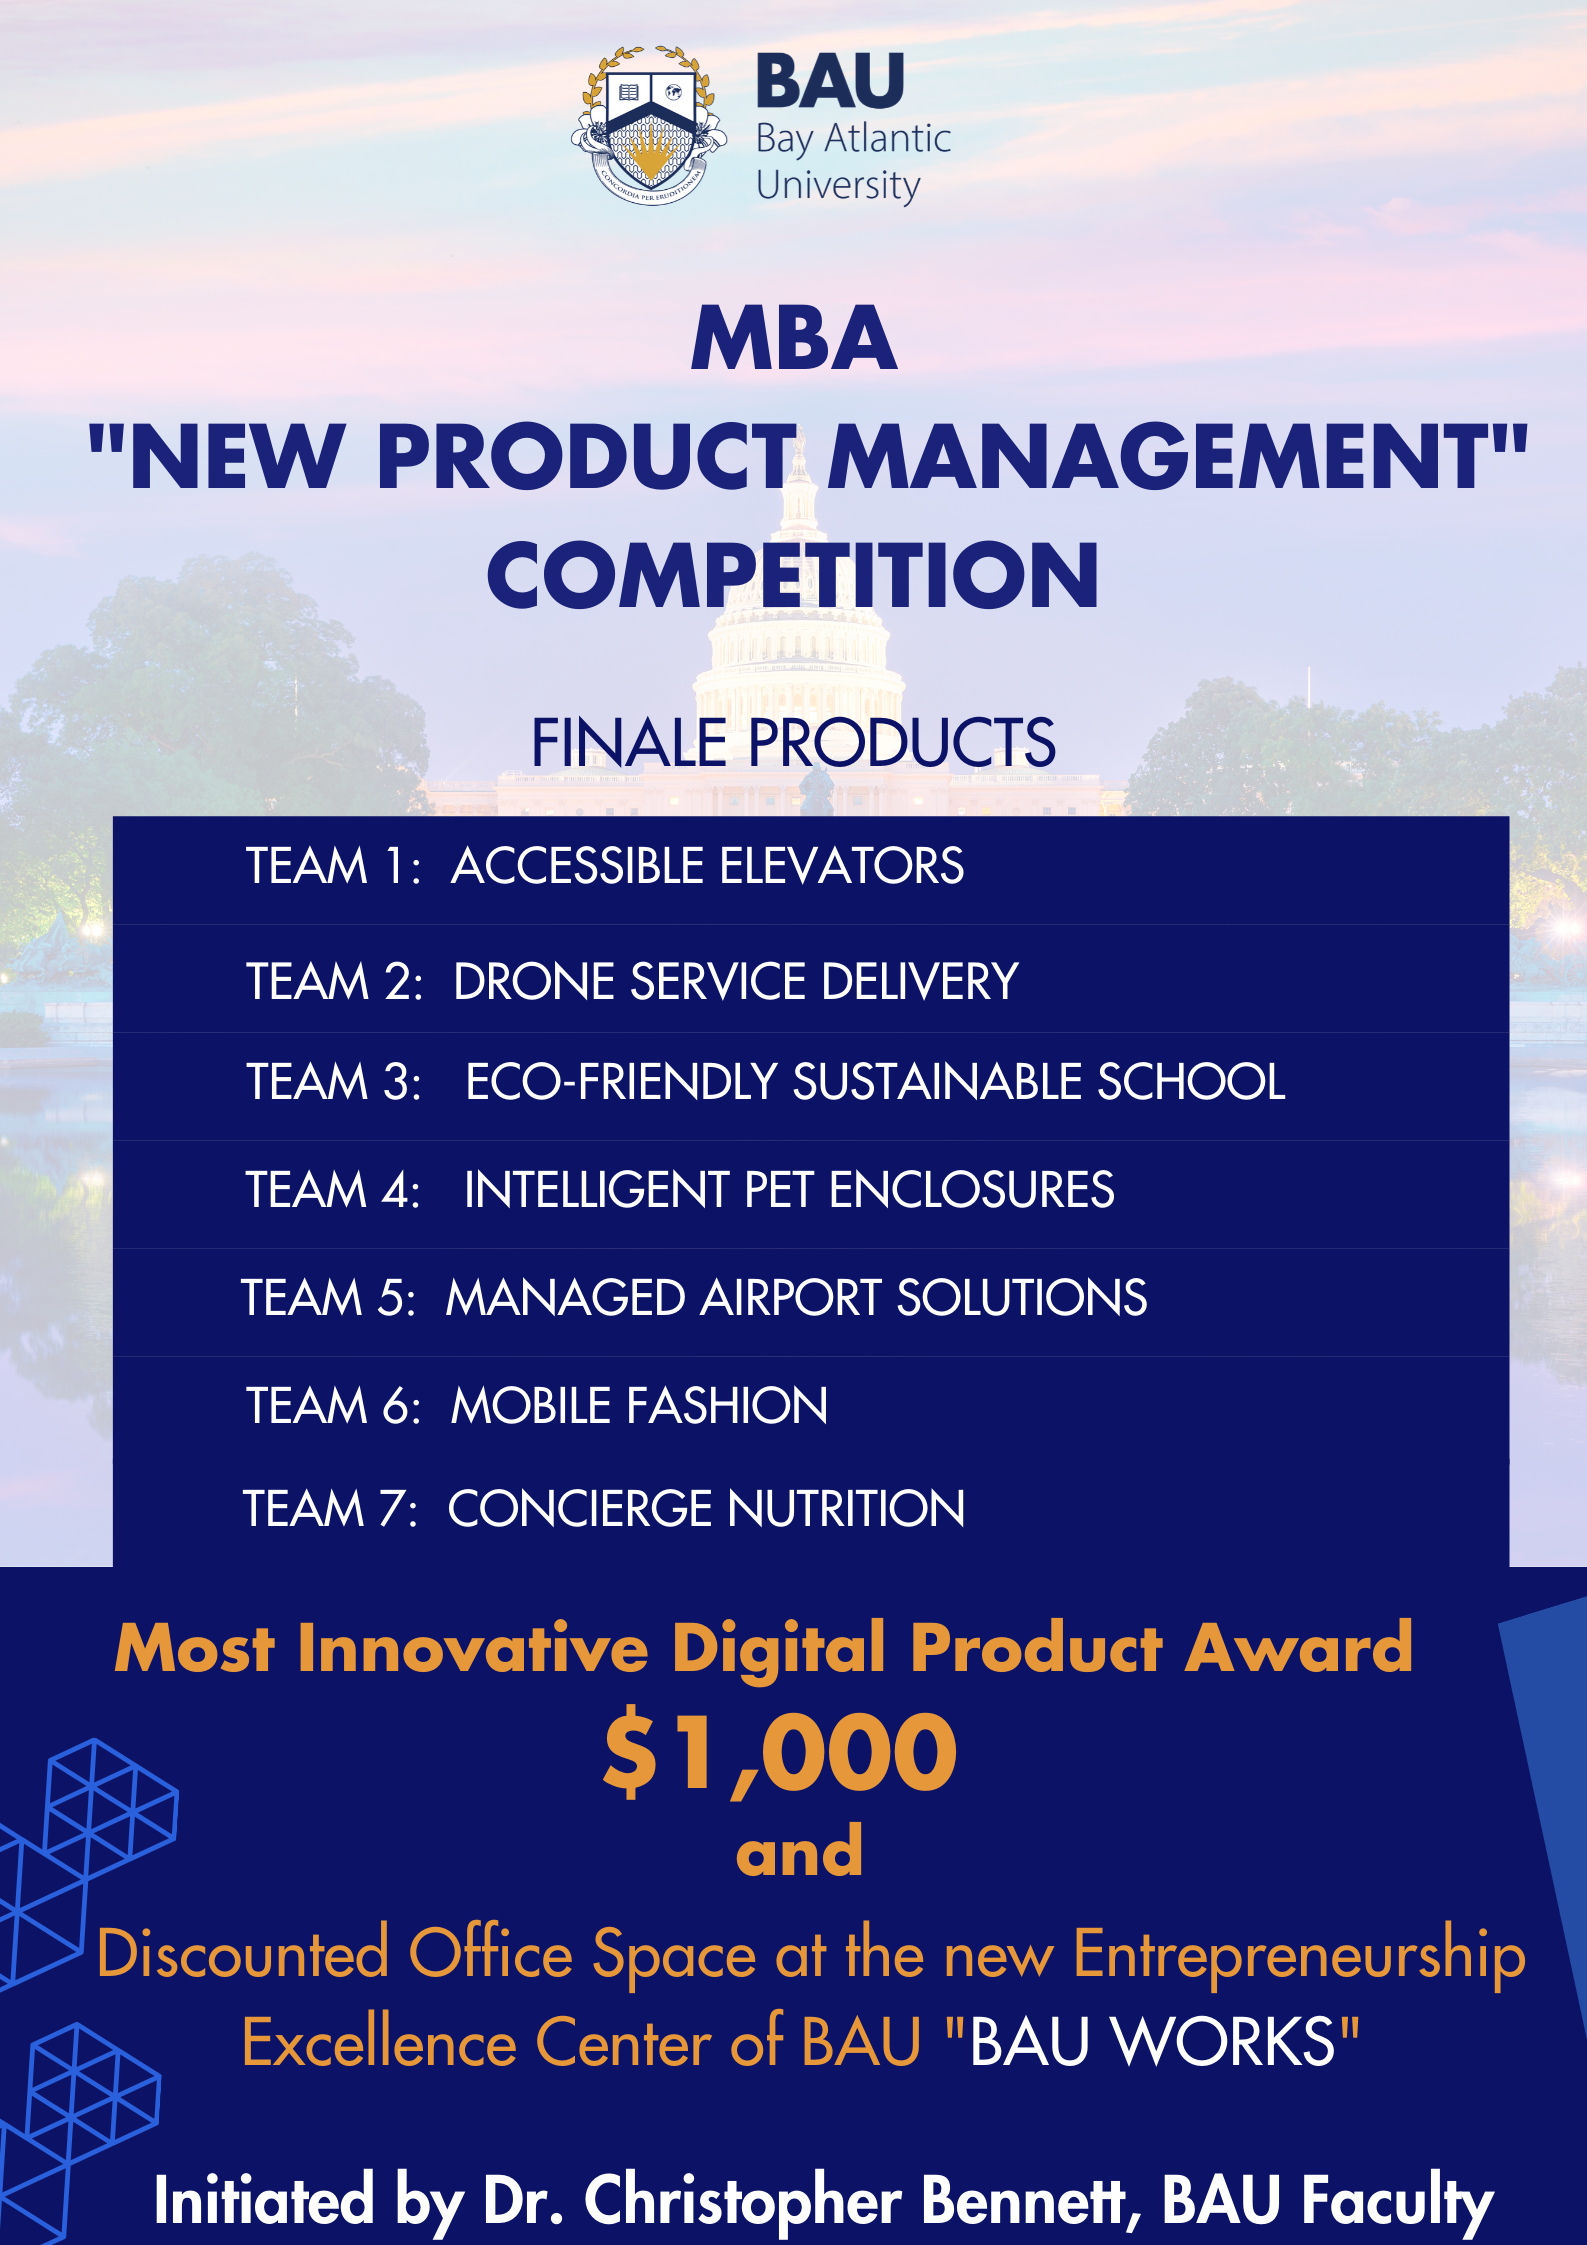 The Winner is here! BAU Virtual New Product Management Launch Competition